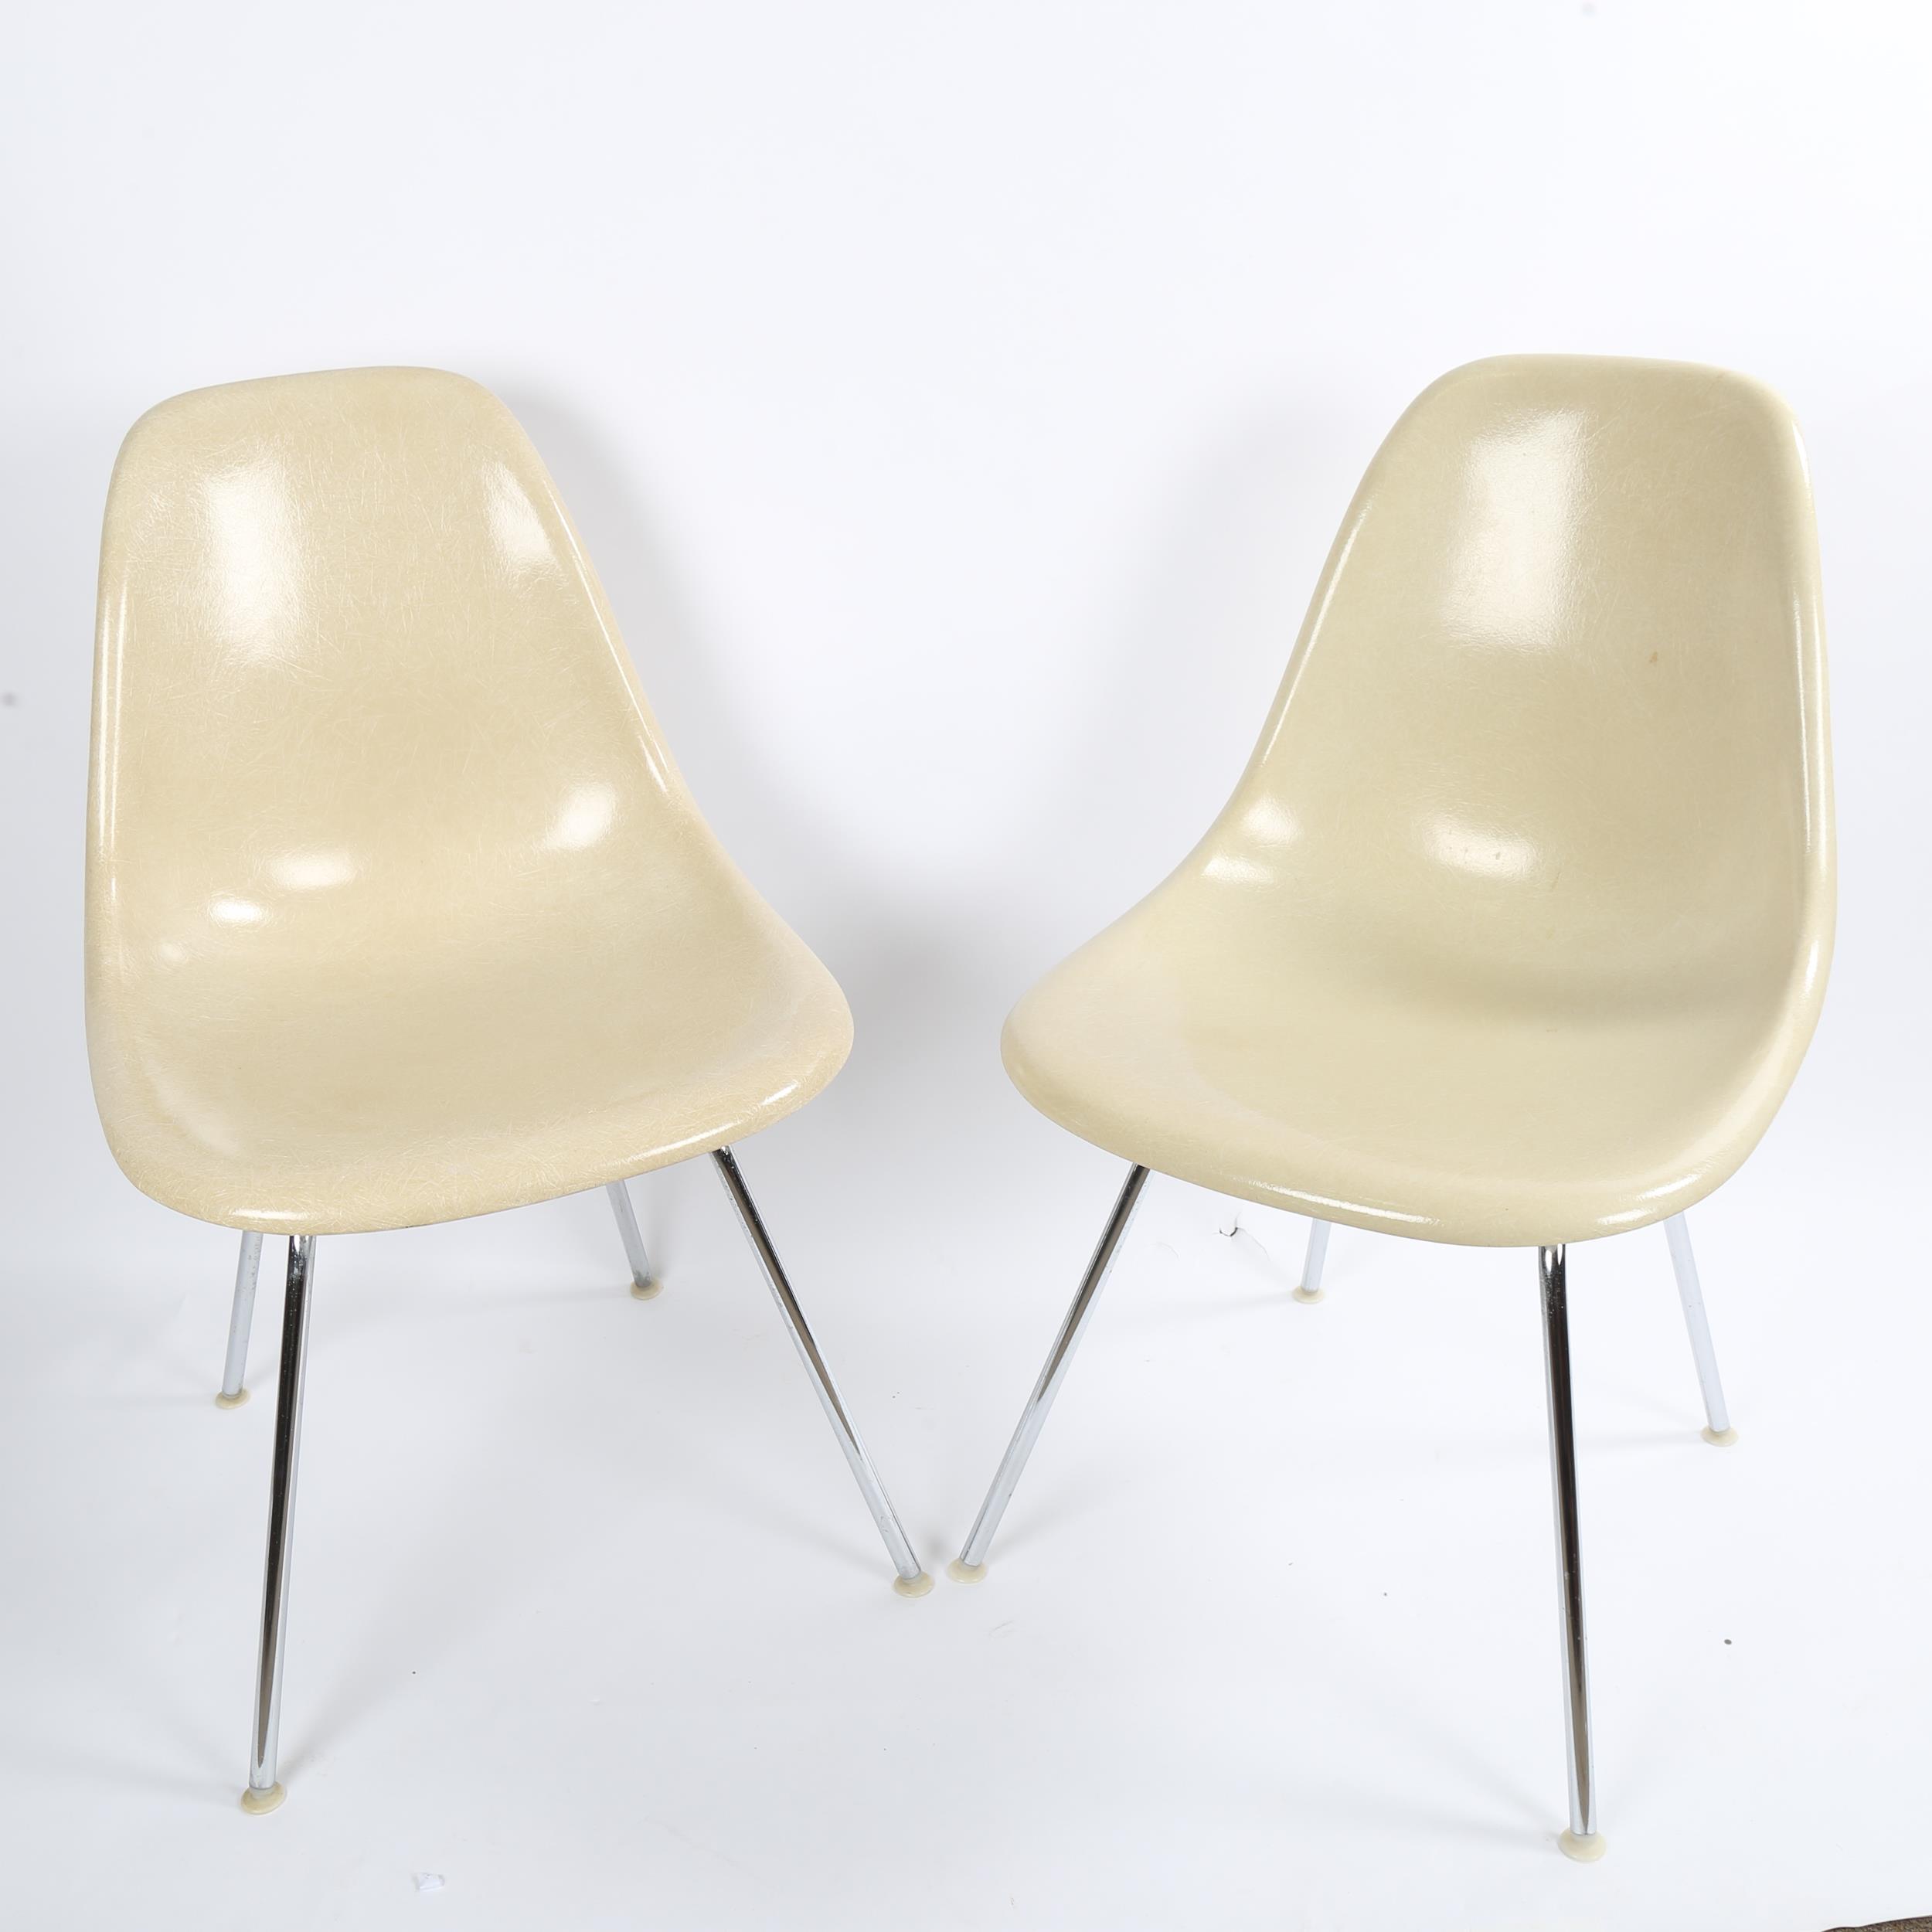 CHARLES EAMES for Herman Miller, a pair of 1970s model DSS fibreglass side chairs, stamped 19